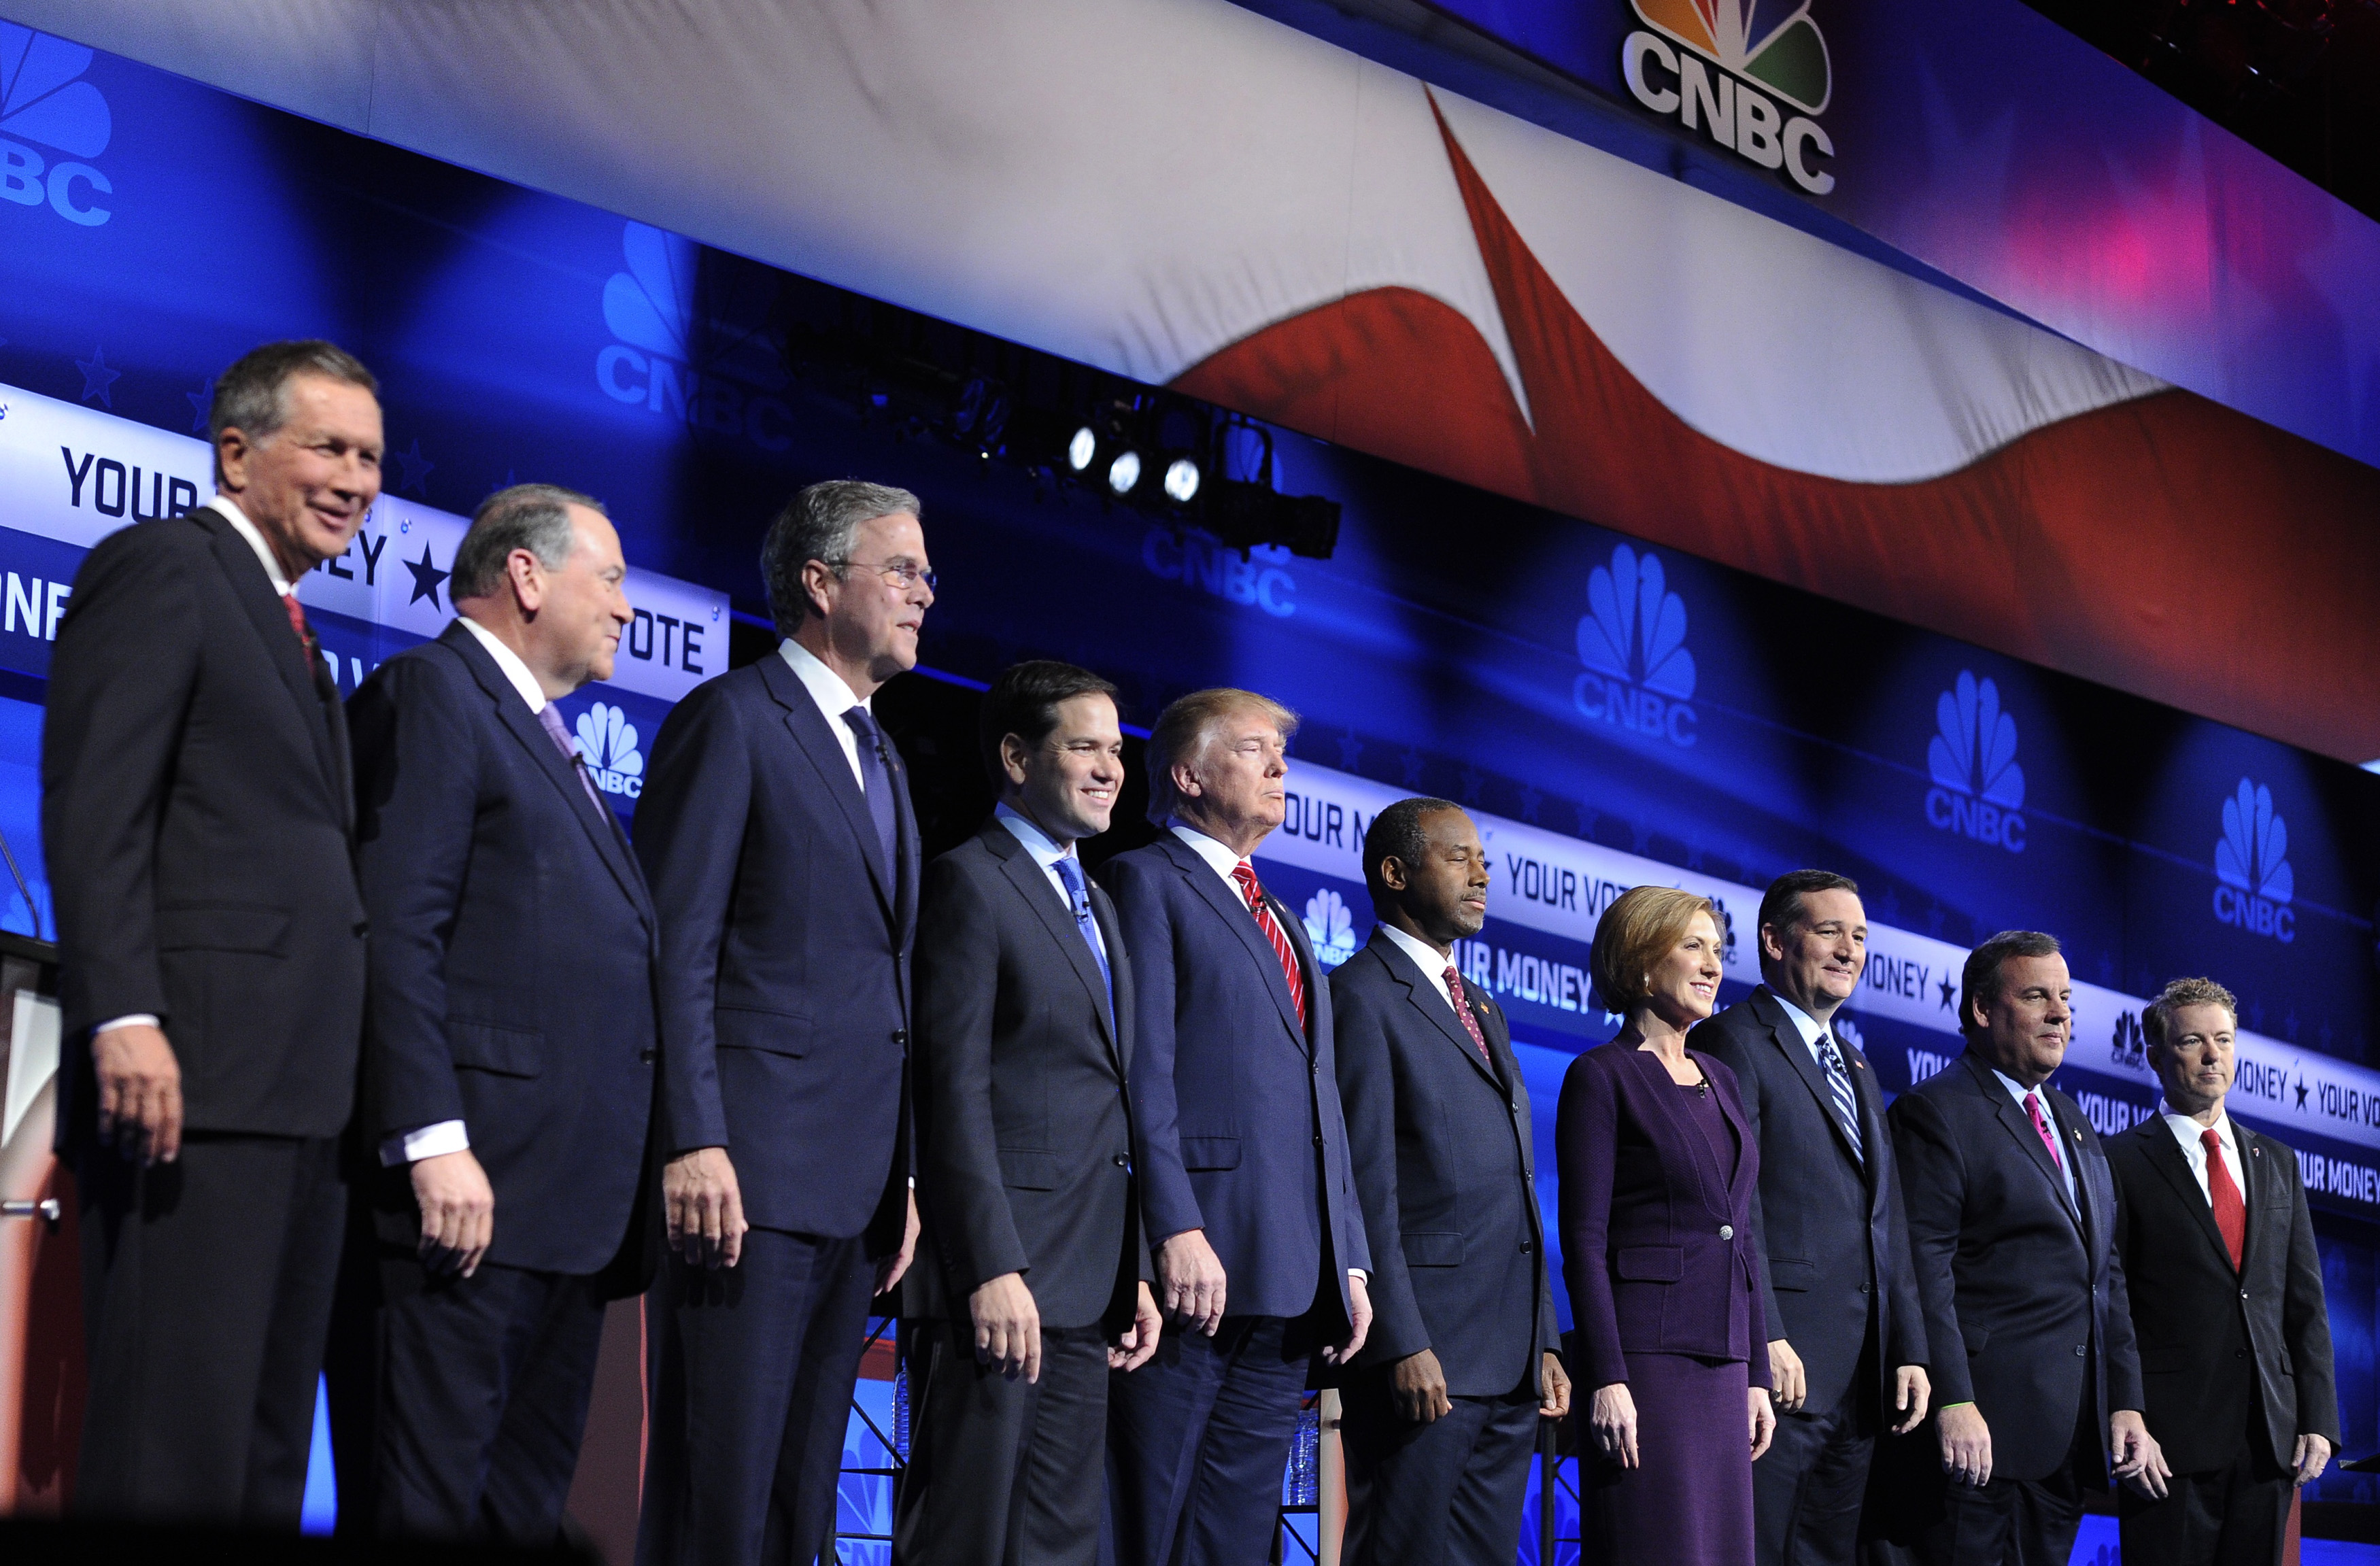 RNC officially cuts ties with NBC for GOP debate CBS News